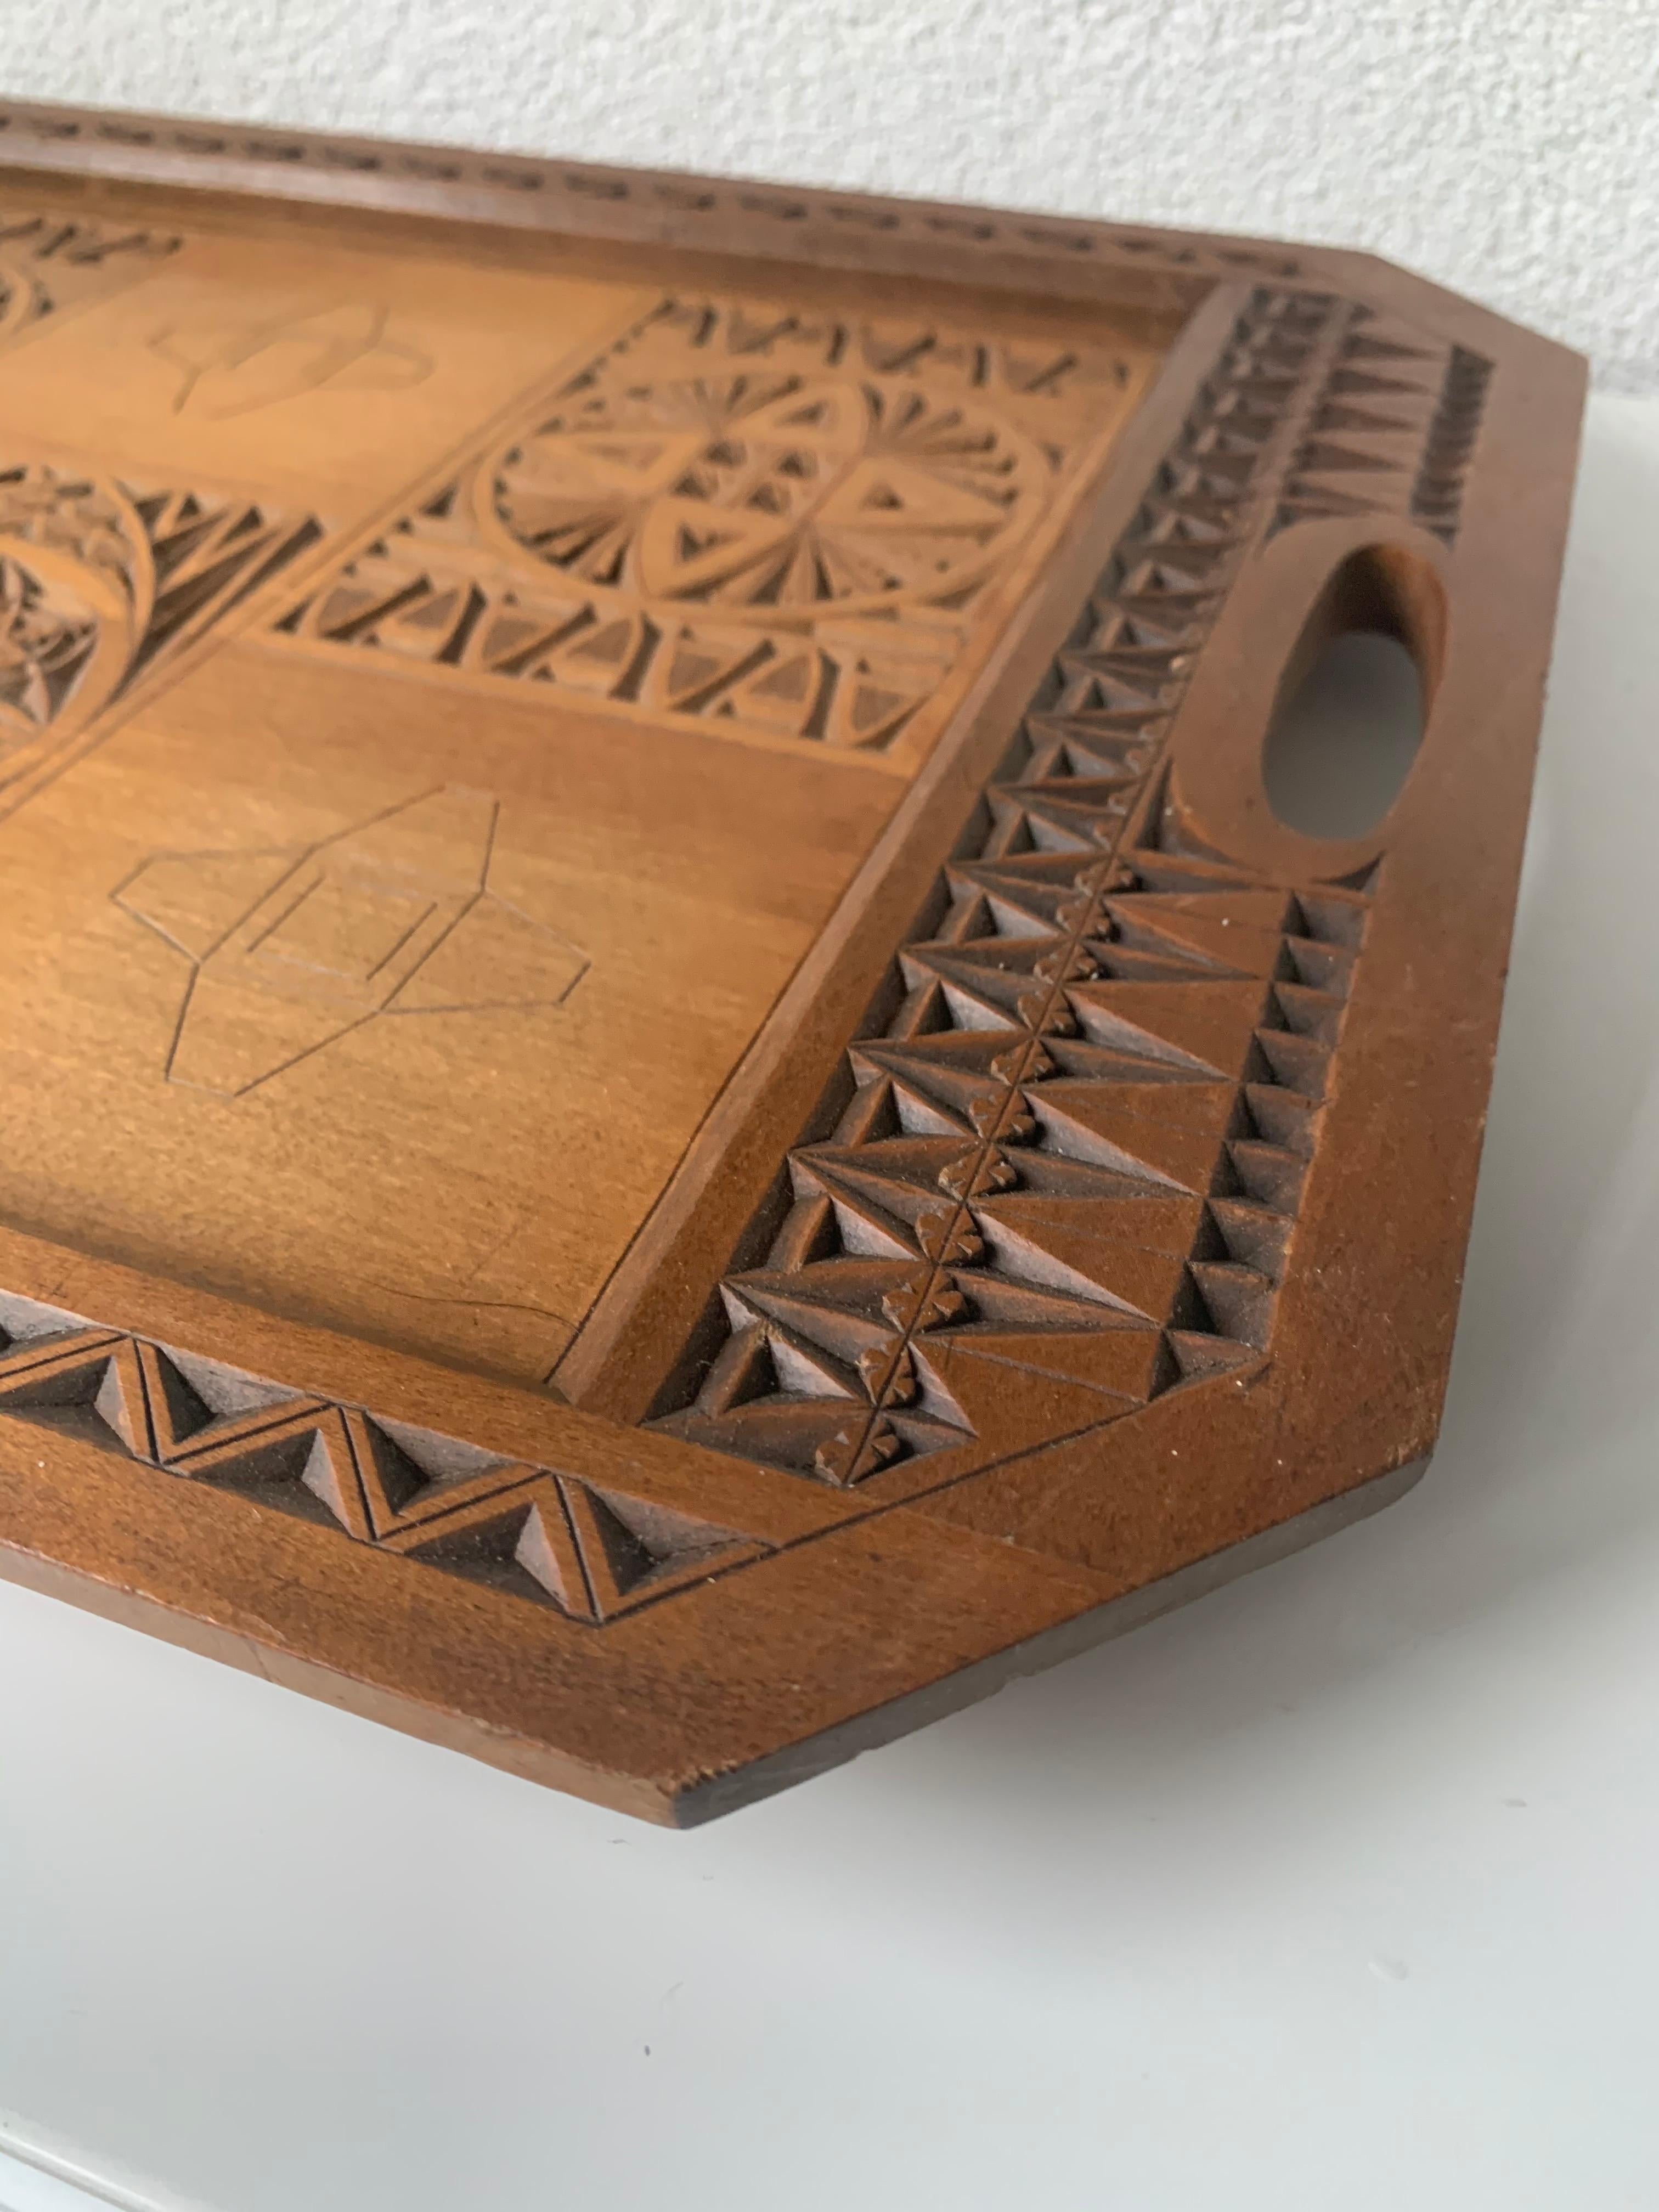 European Arts & Crafts Folk Art Serving Tray with Hand Carved Geometric Motifs For Sale